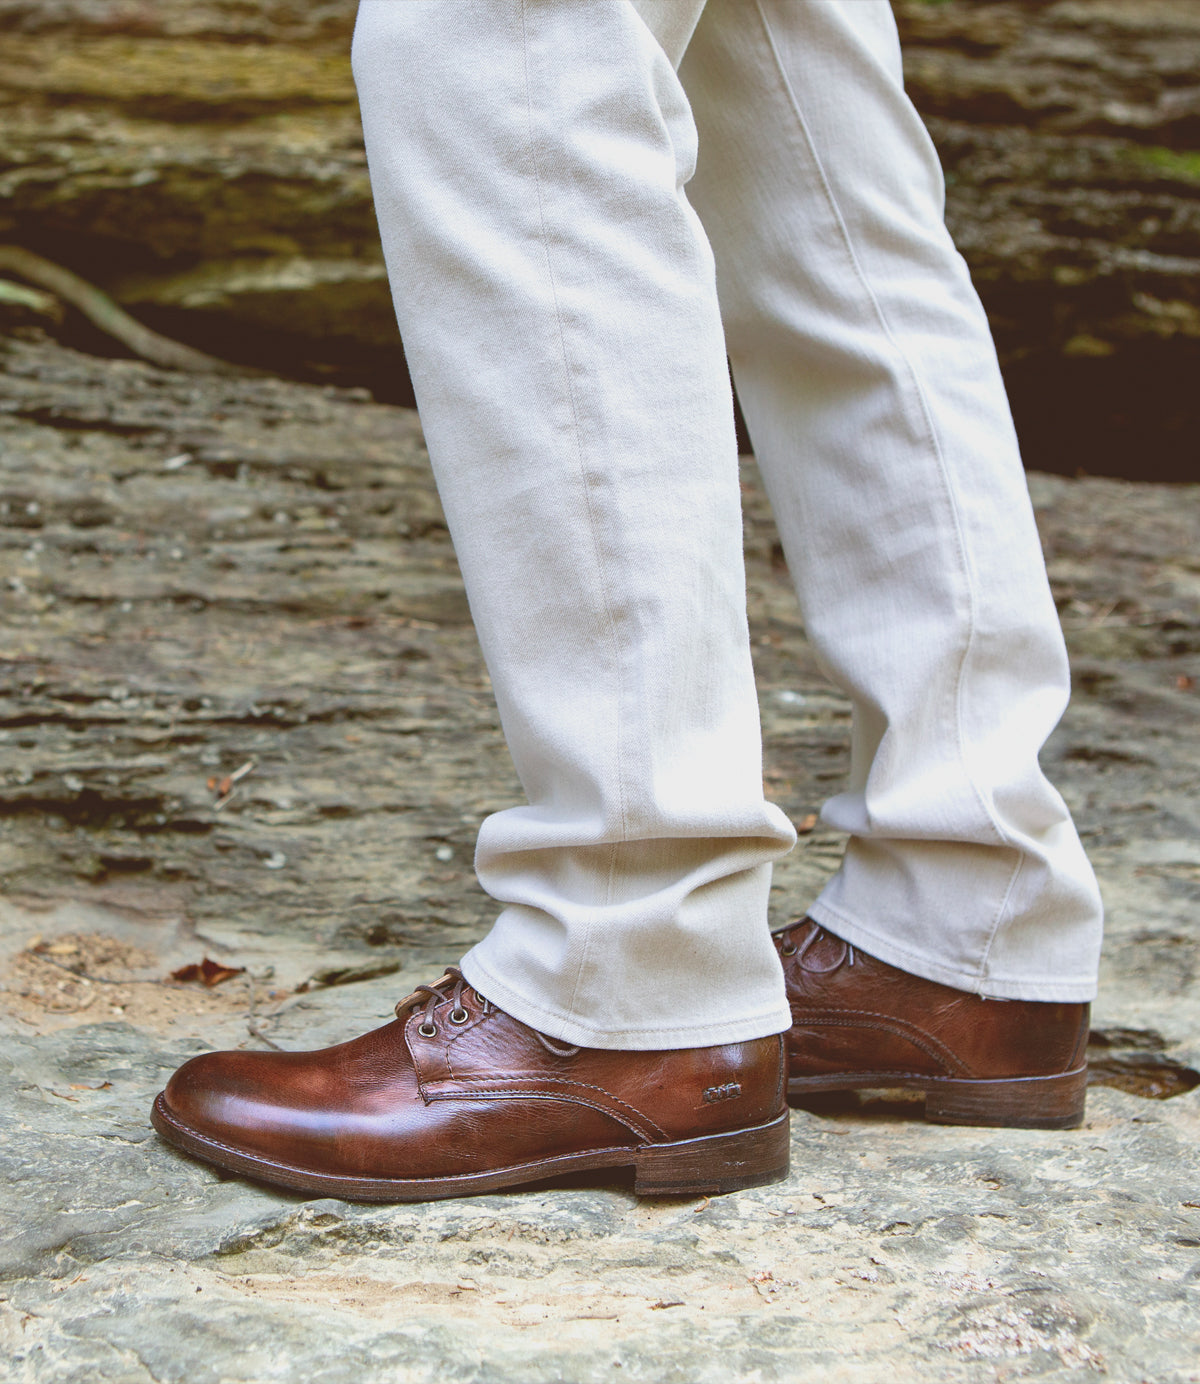 A close-up view of a person wearing beige trousers and brown Bed Stu Black Rustic Boots standing on rocky terrain.